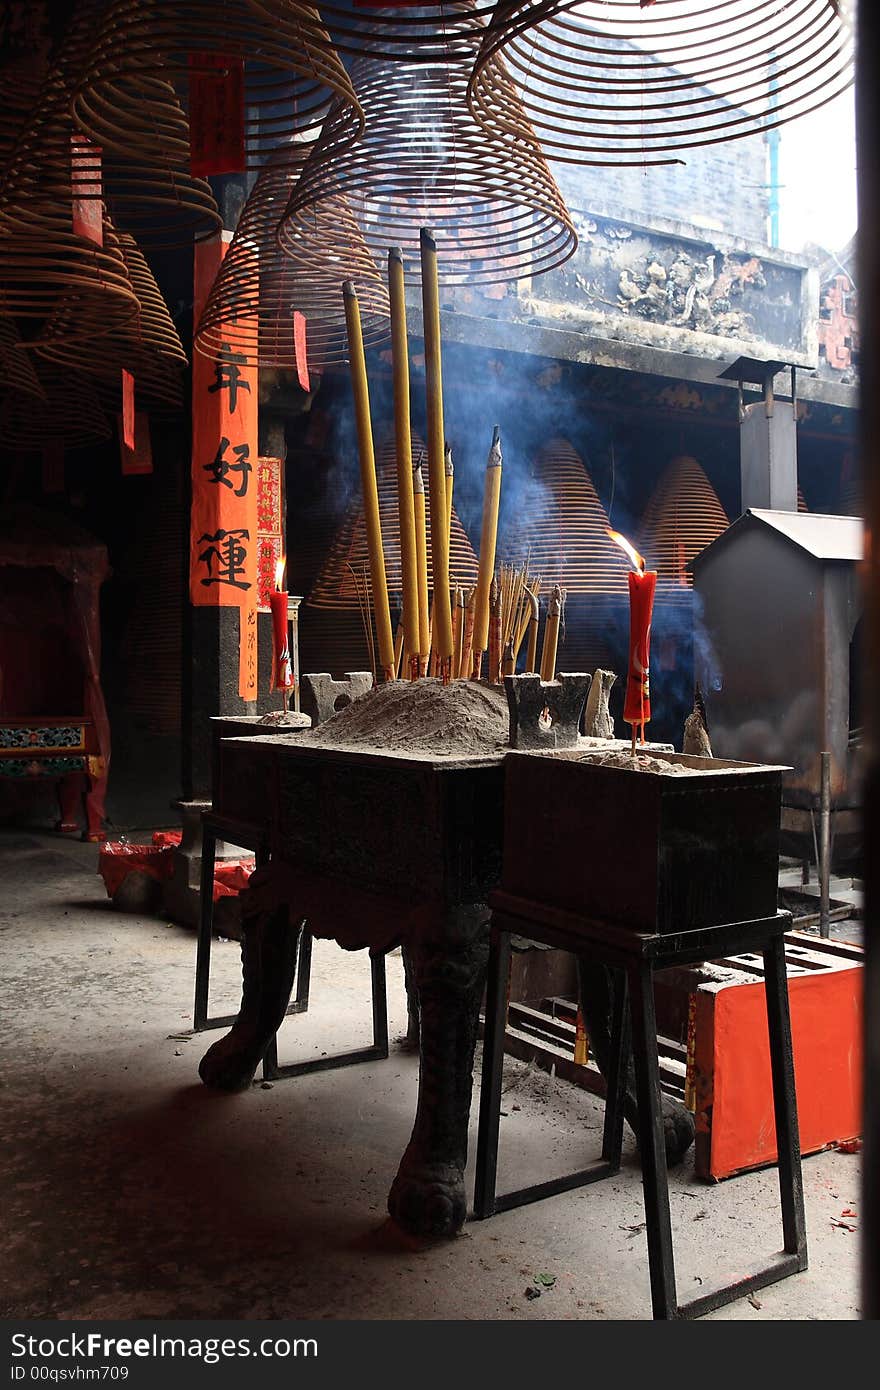 Incense tower, you can find it in some Chinese ancient temple